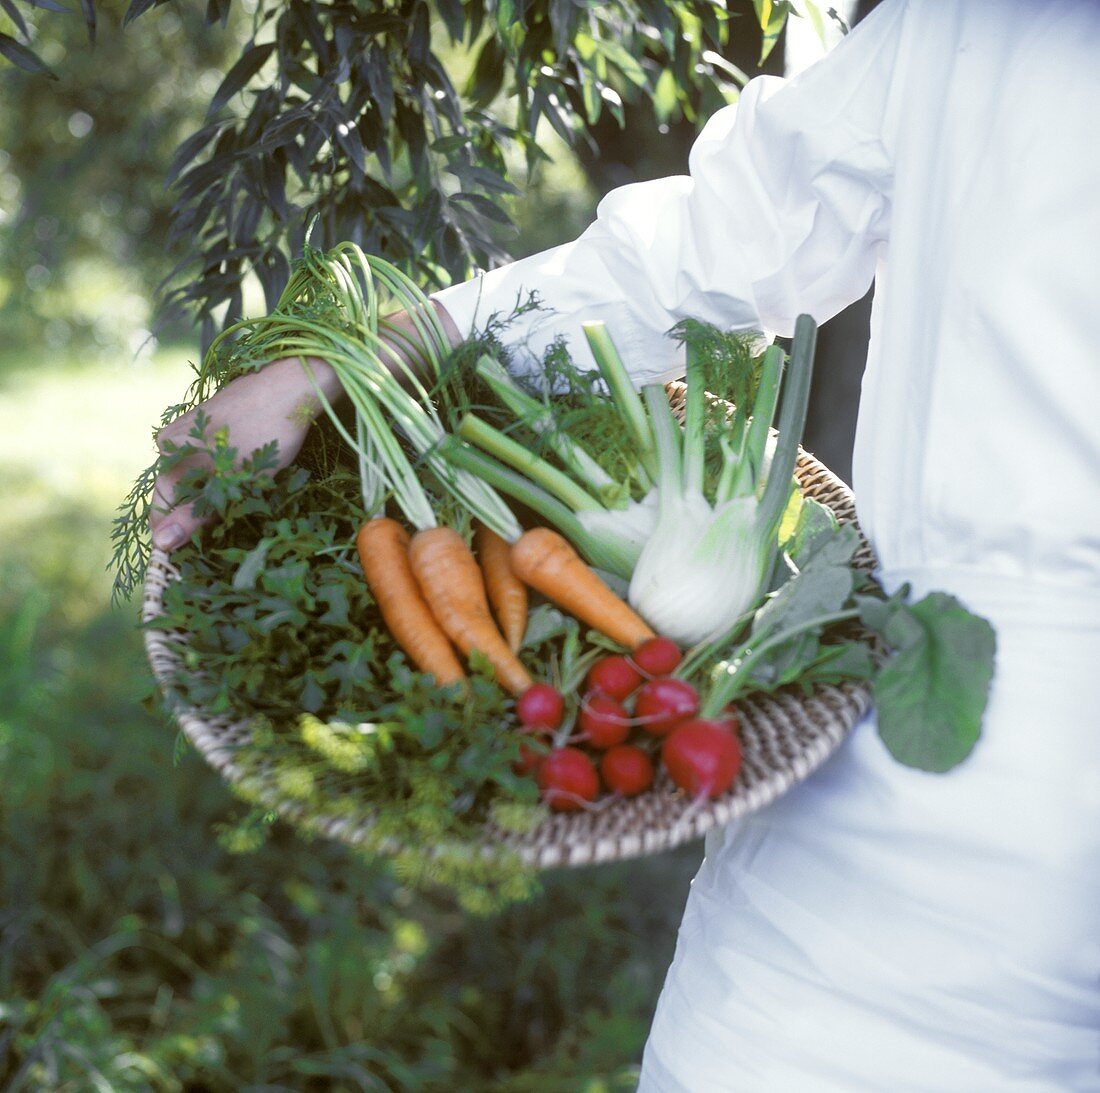 Various vegetables in a basket held by a woman